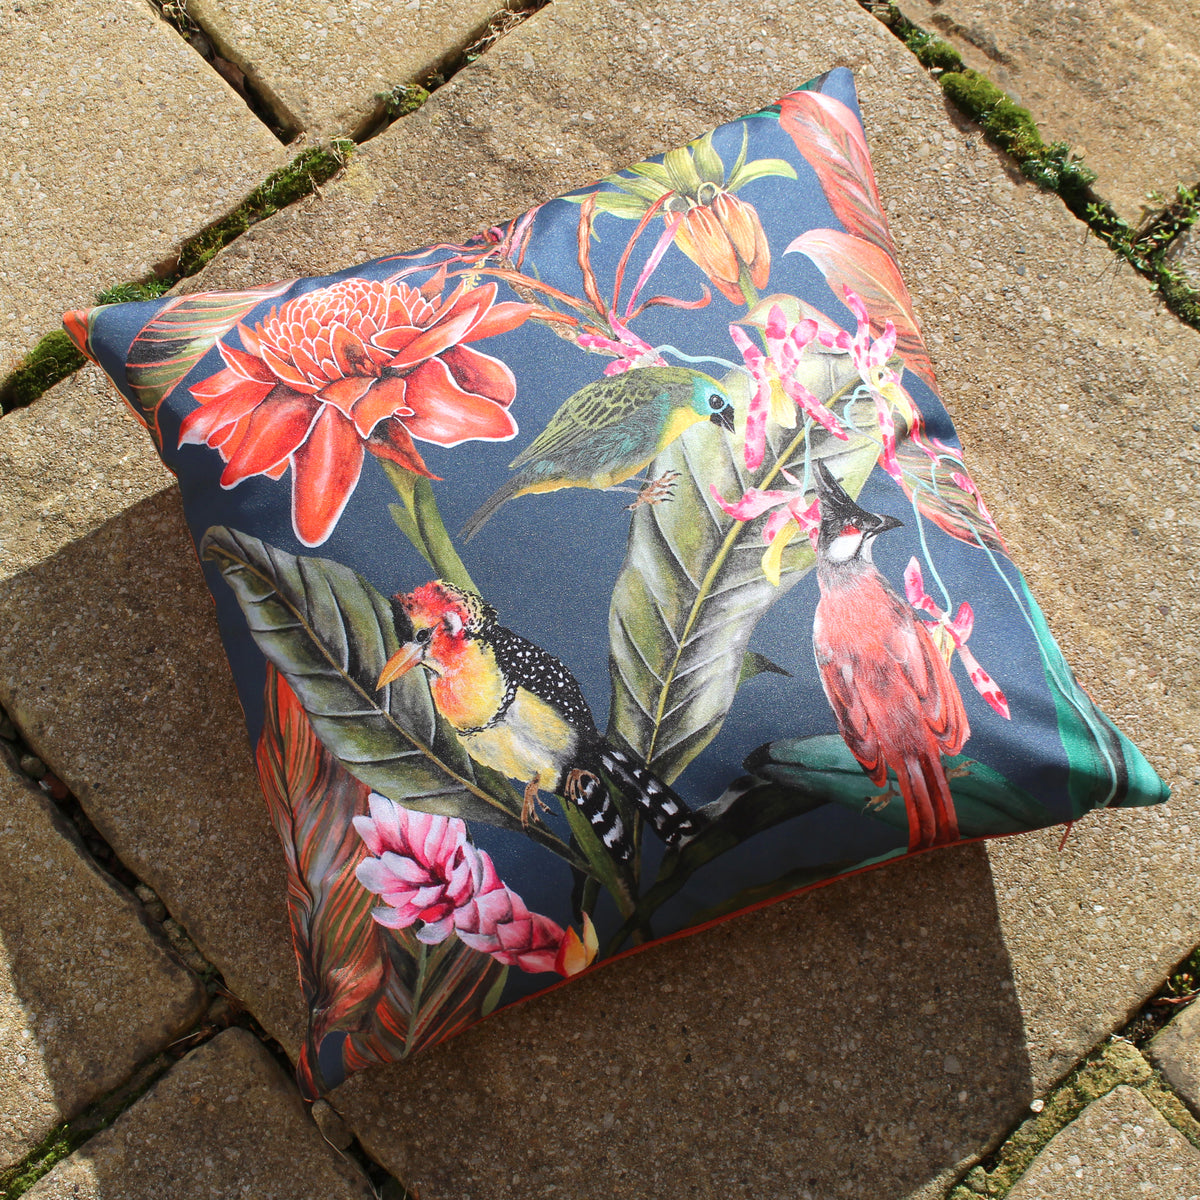 Exotics 43cm Reversible Outdoor Polyester Cushion